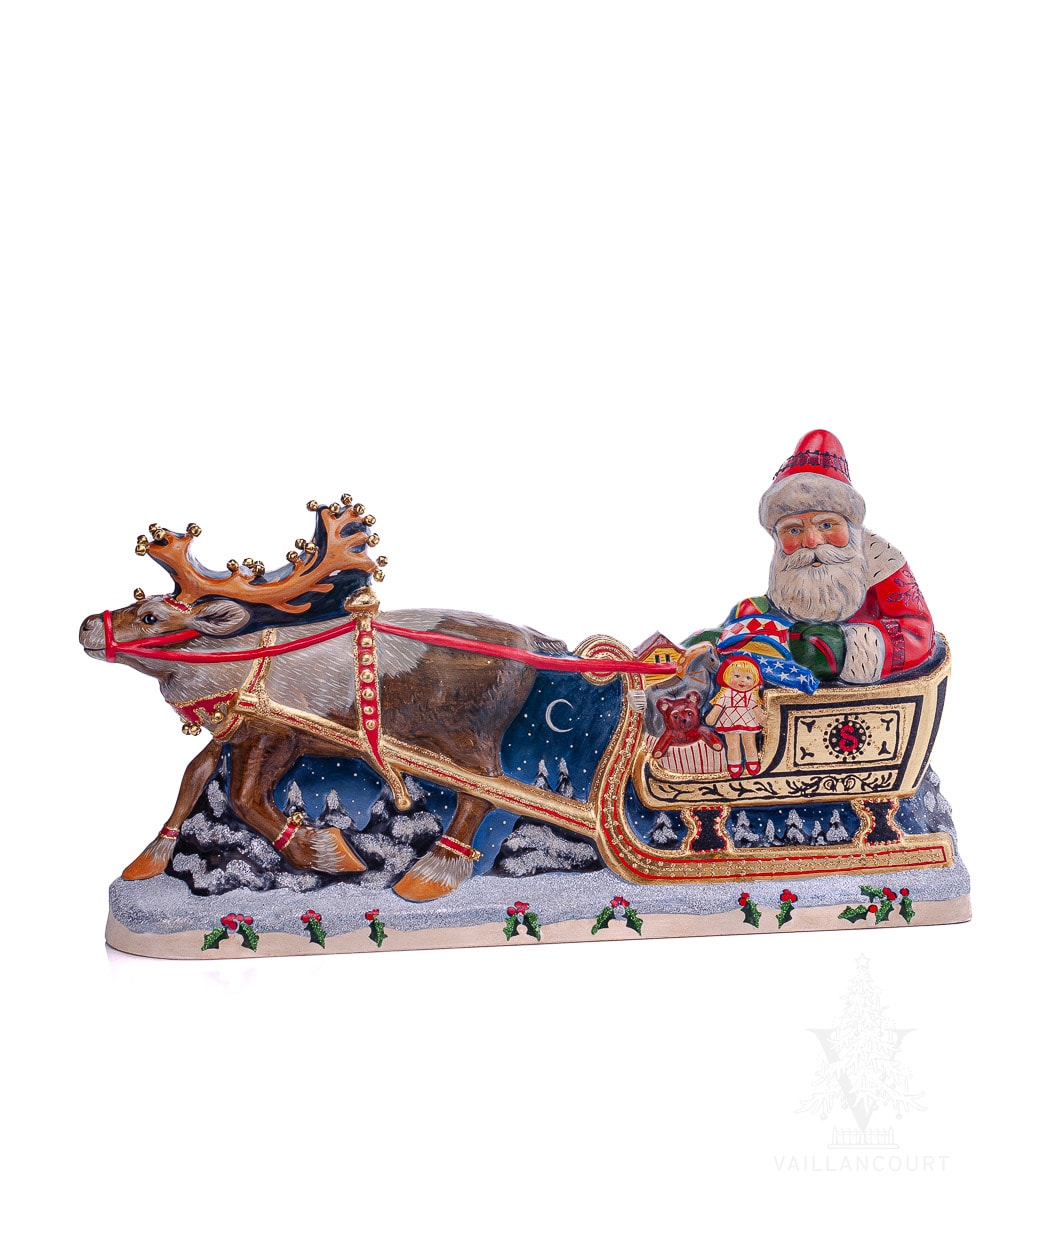 Midnight Delivery Large Sleigh